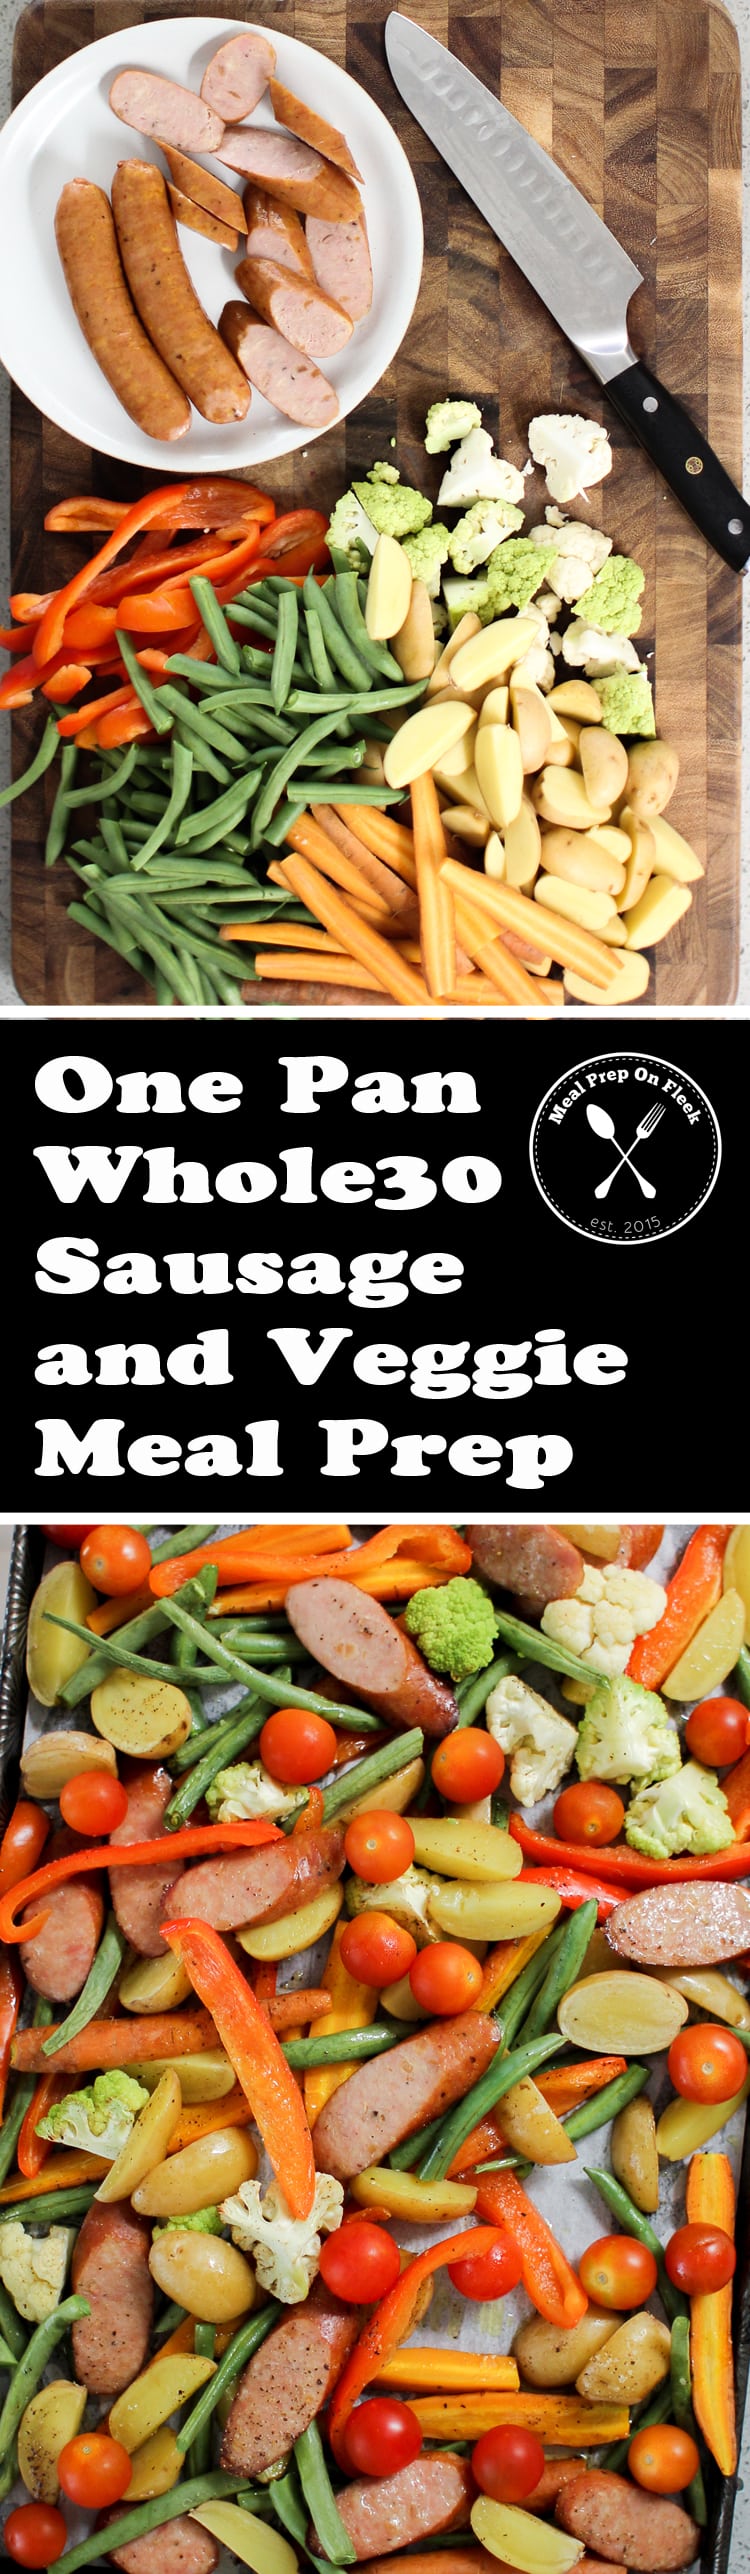 One-Pan-Whole30-Sausage-and-Veggie-Meal-Prep